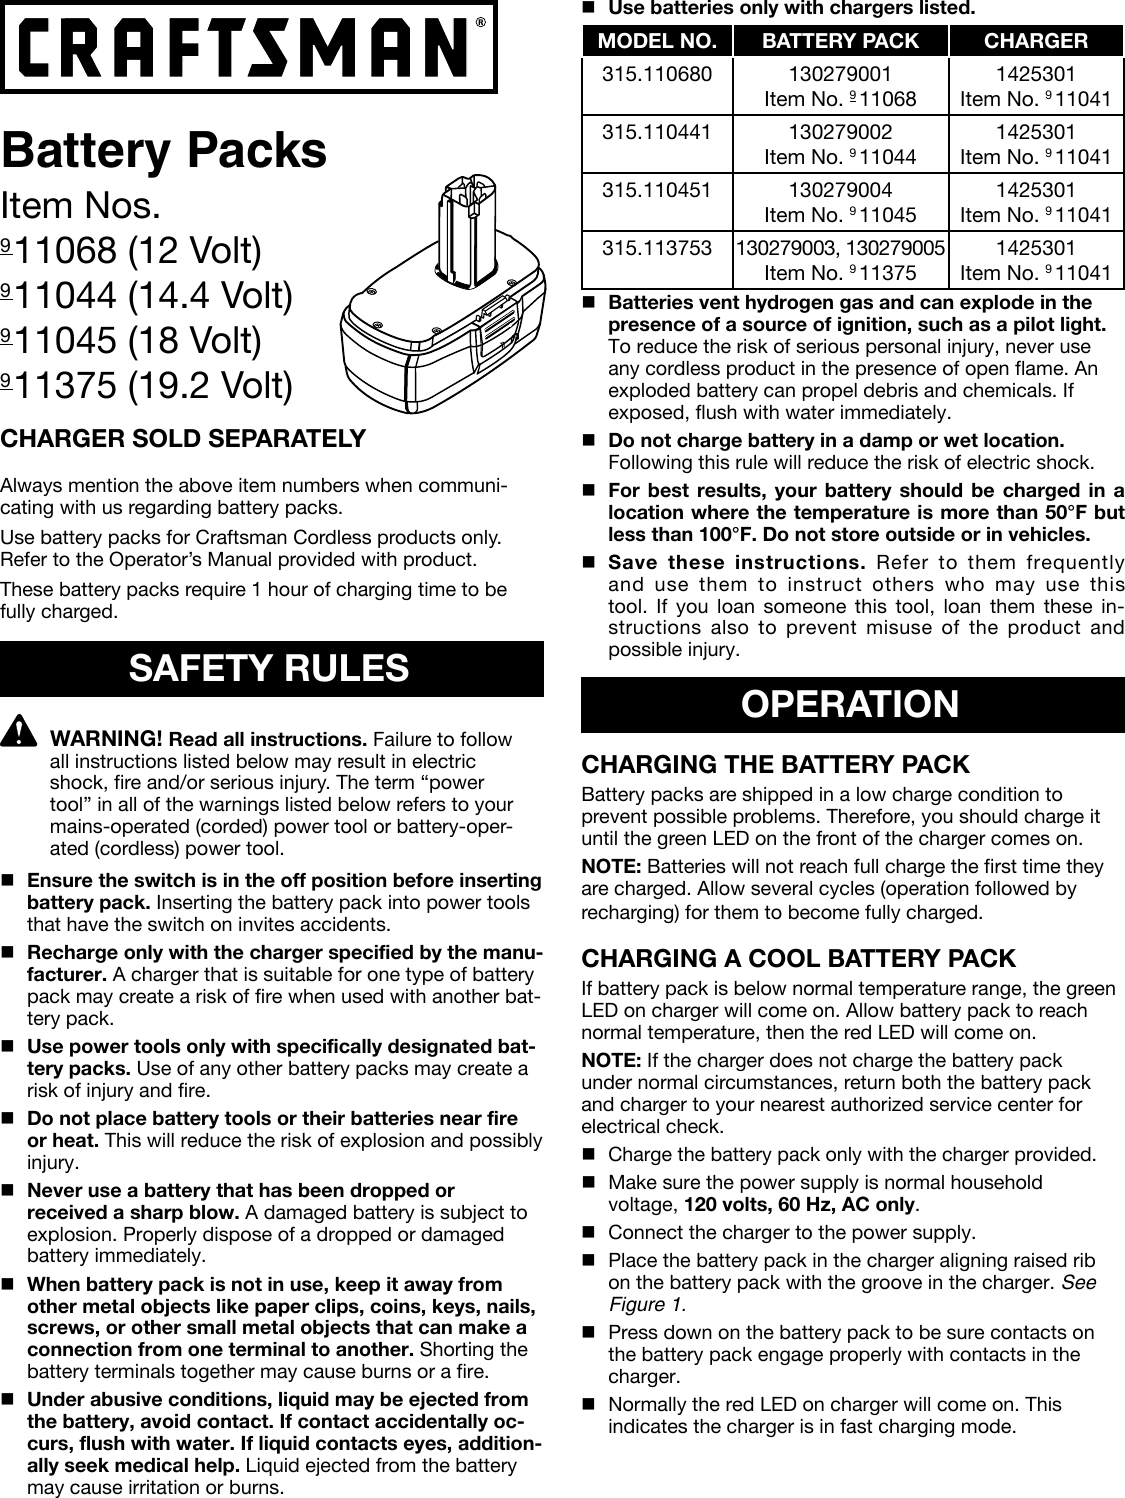 Page 1 of 4 - Craftsman Craftsman-19-2-Volt-Replacement-Battery-Pack-Owners-Manual-  Craftsman-19-2-volt-replacement-battery-pack-owners-manual